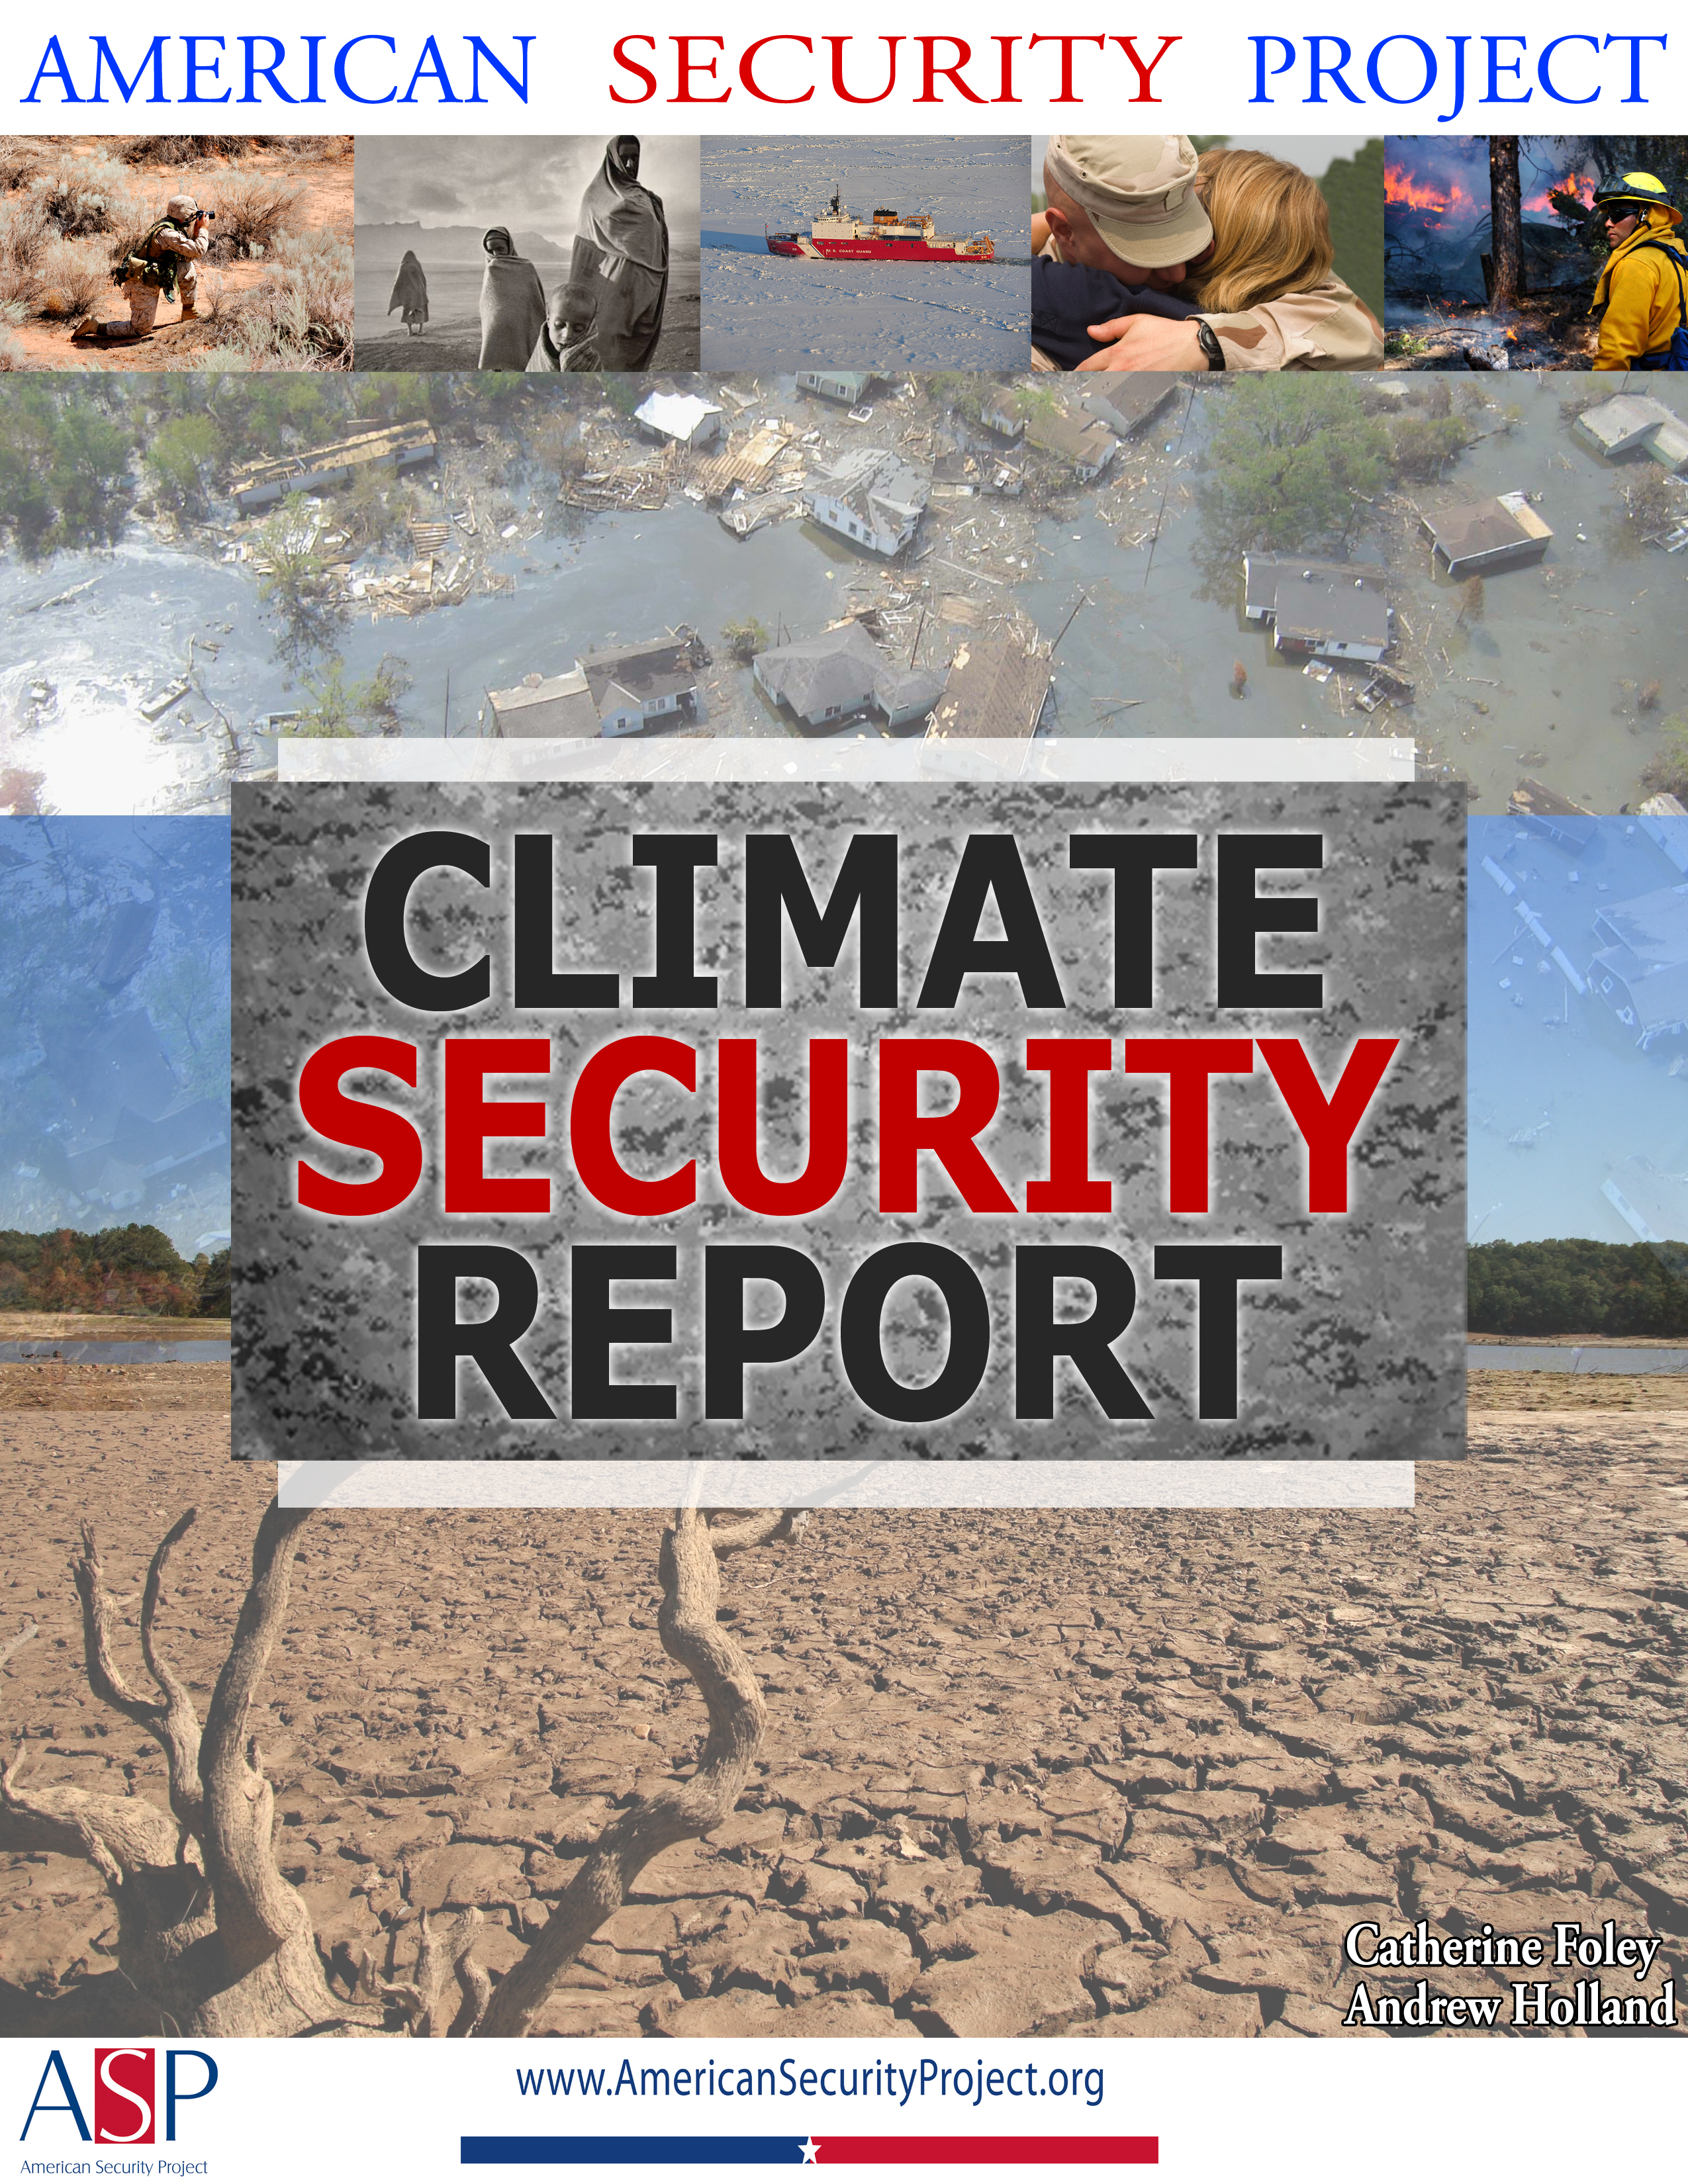 A “Climate Security 101”